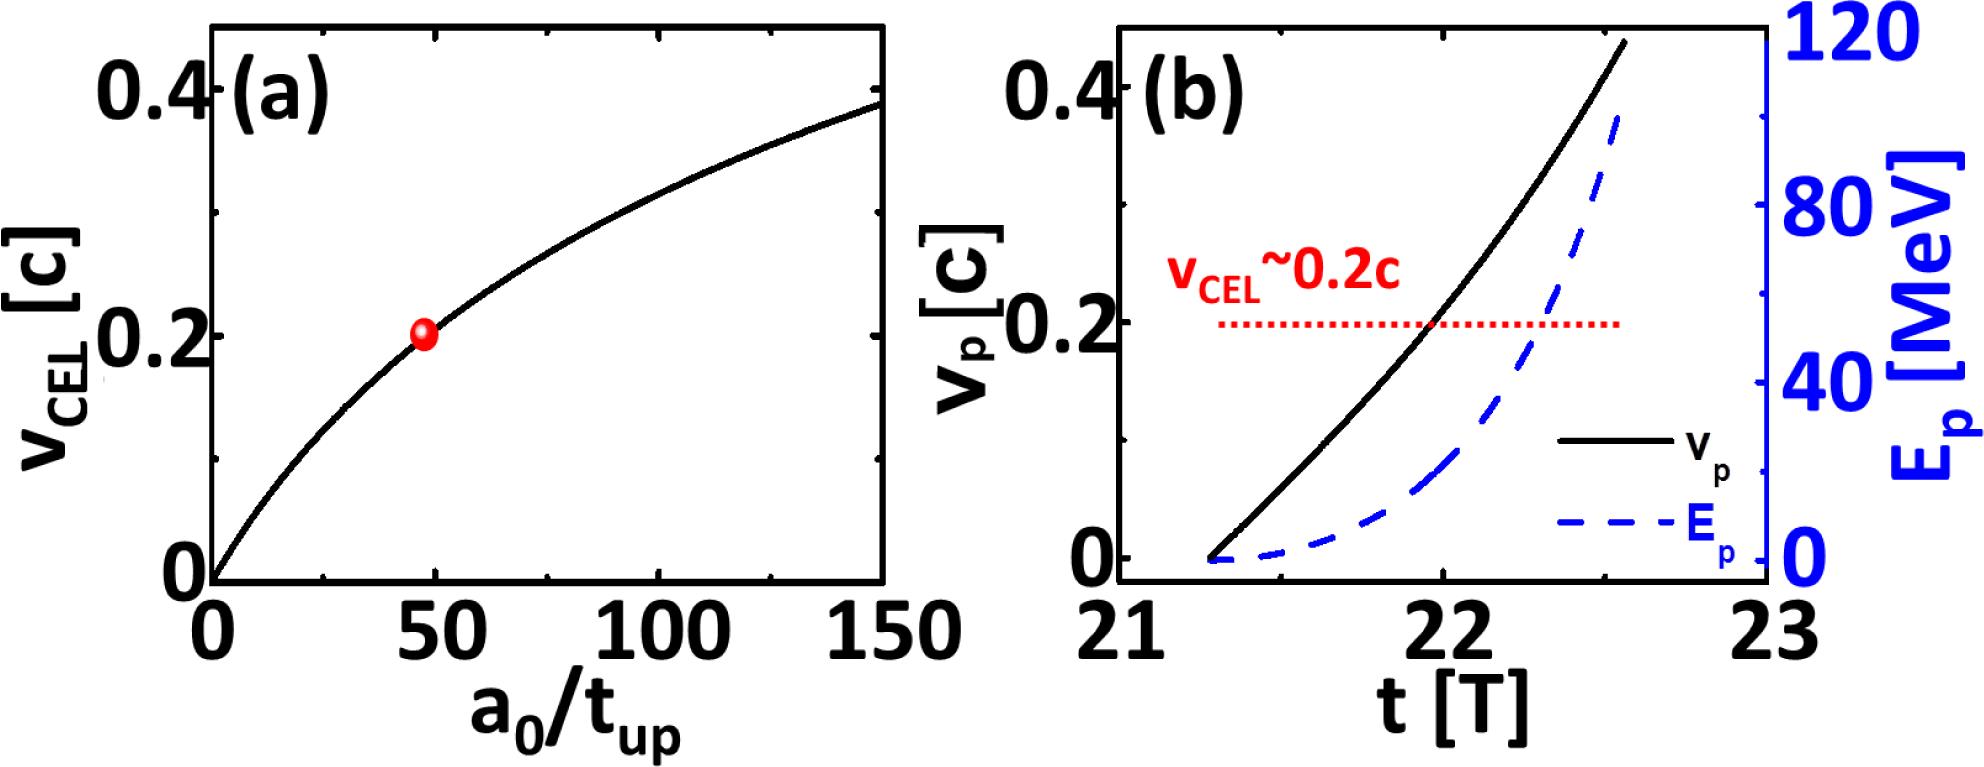 (a) Relation between the velocity of the compressed electron layer $v_{\text{CEL}}$ and the steepness of the laser front $a_{0}/t_{\text{up}}$ according to Equation (5) for $n_{0}=50n_{\text{c}}$. (b) Evolutions of the velocity, $v_{\text{p}}$ (black solid line), and energy, $E_{\text{p}}$, of the proton layer during the HB stage.